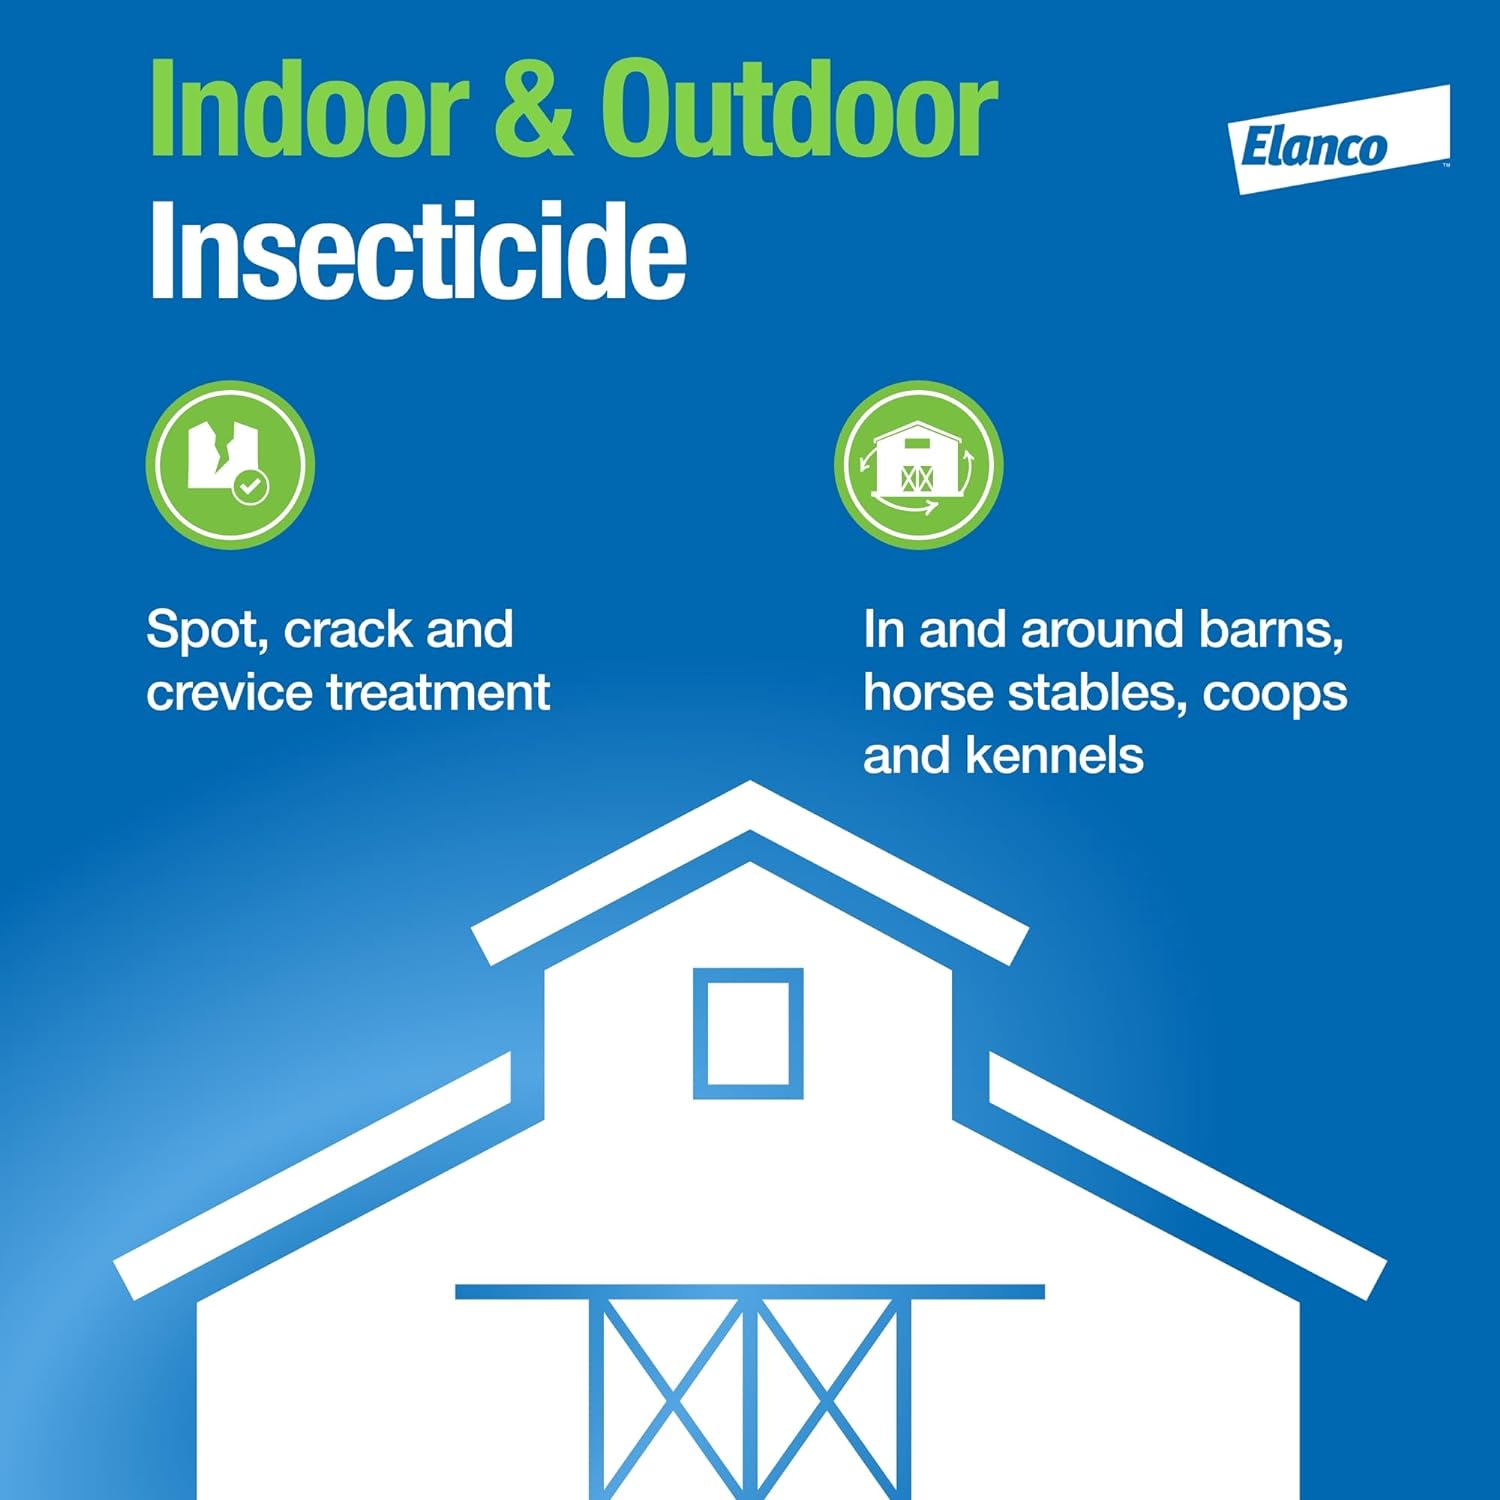 Elanco CyLence Ultra Pest Control Concentrate: The Ultimate Solution for Pest Infestation